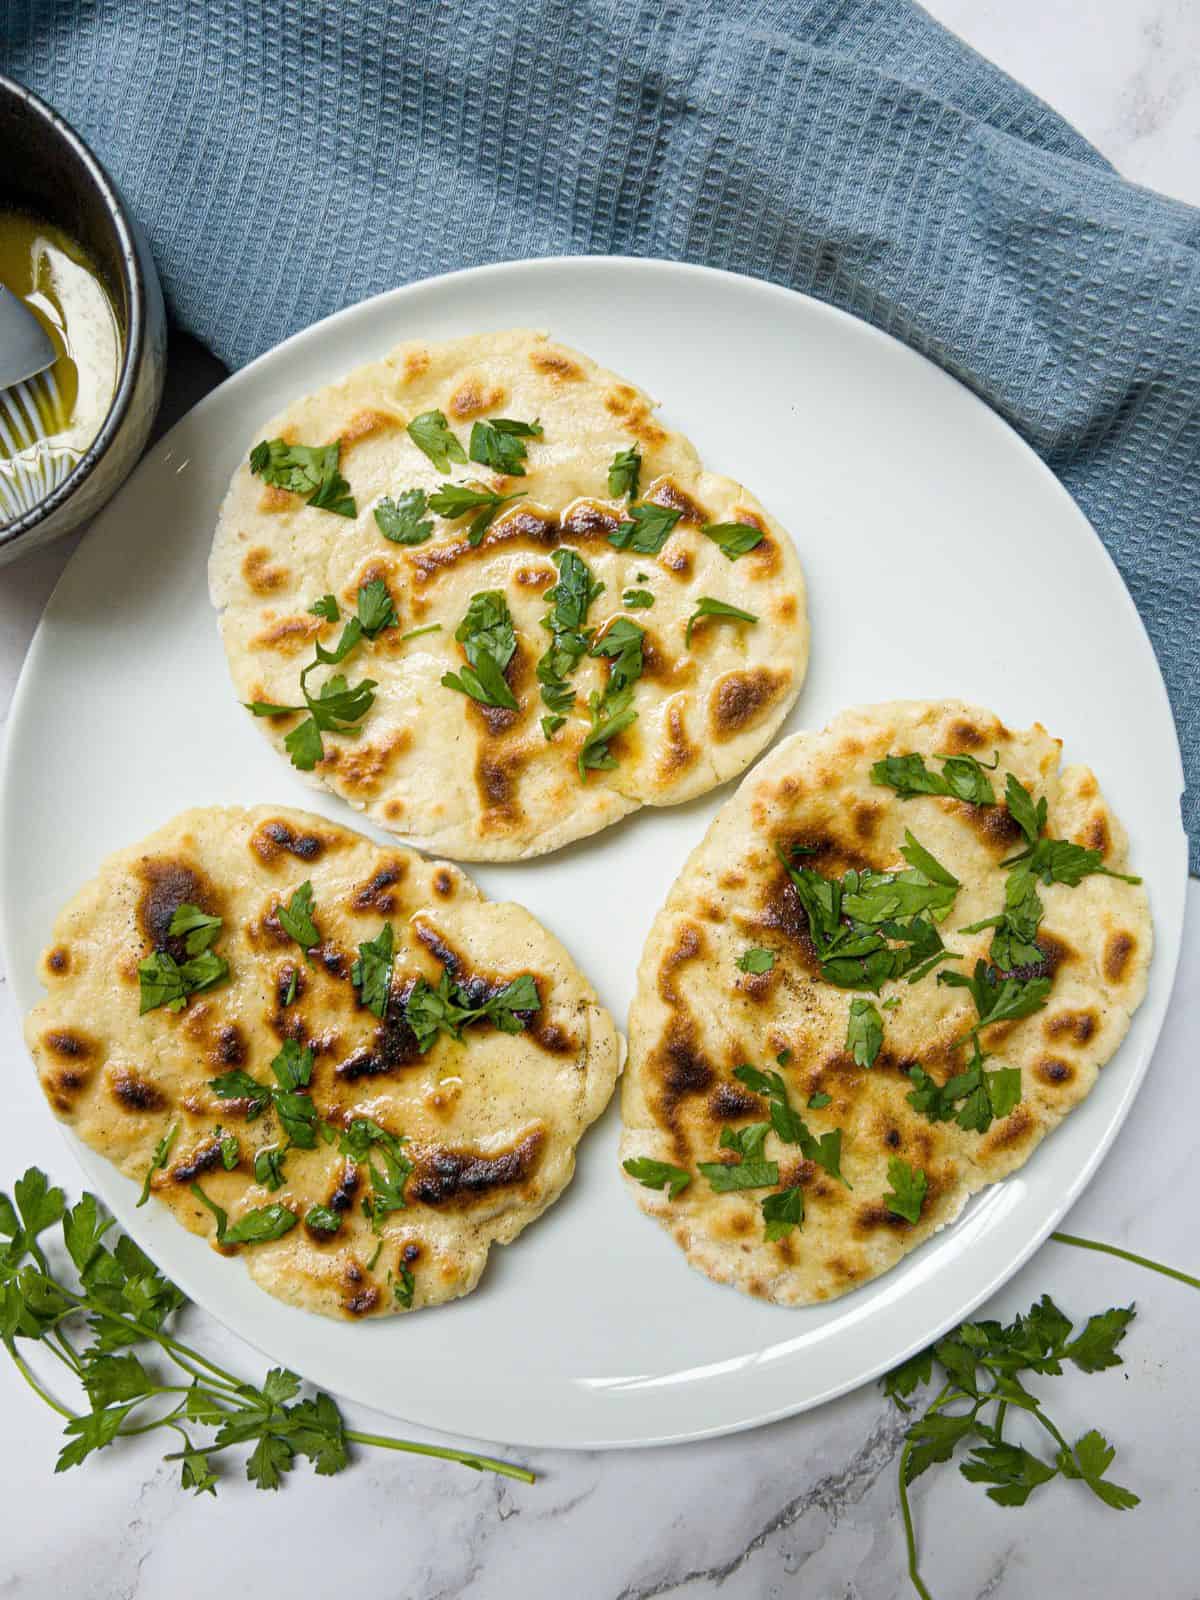 3 naan breads on a white plate garnished with parsley.